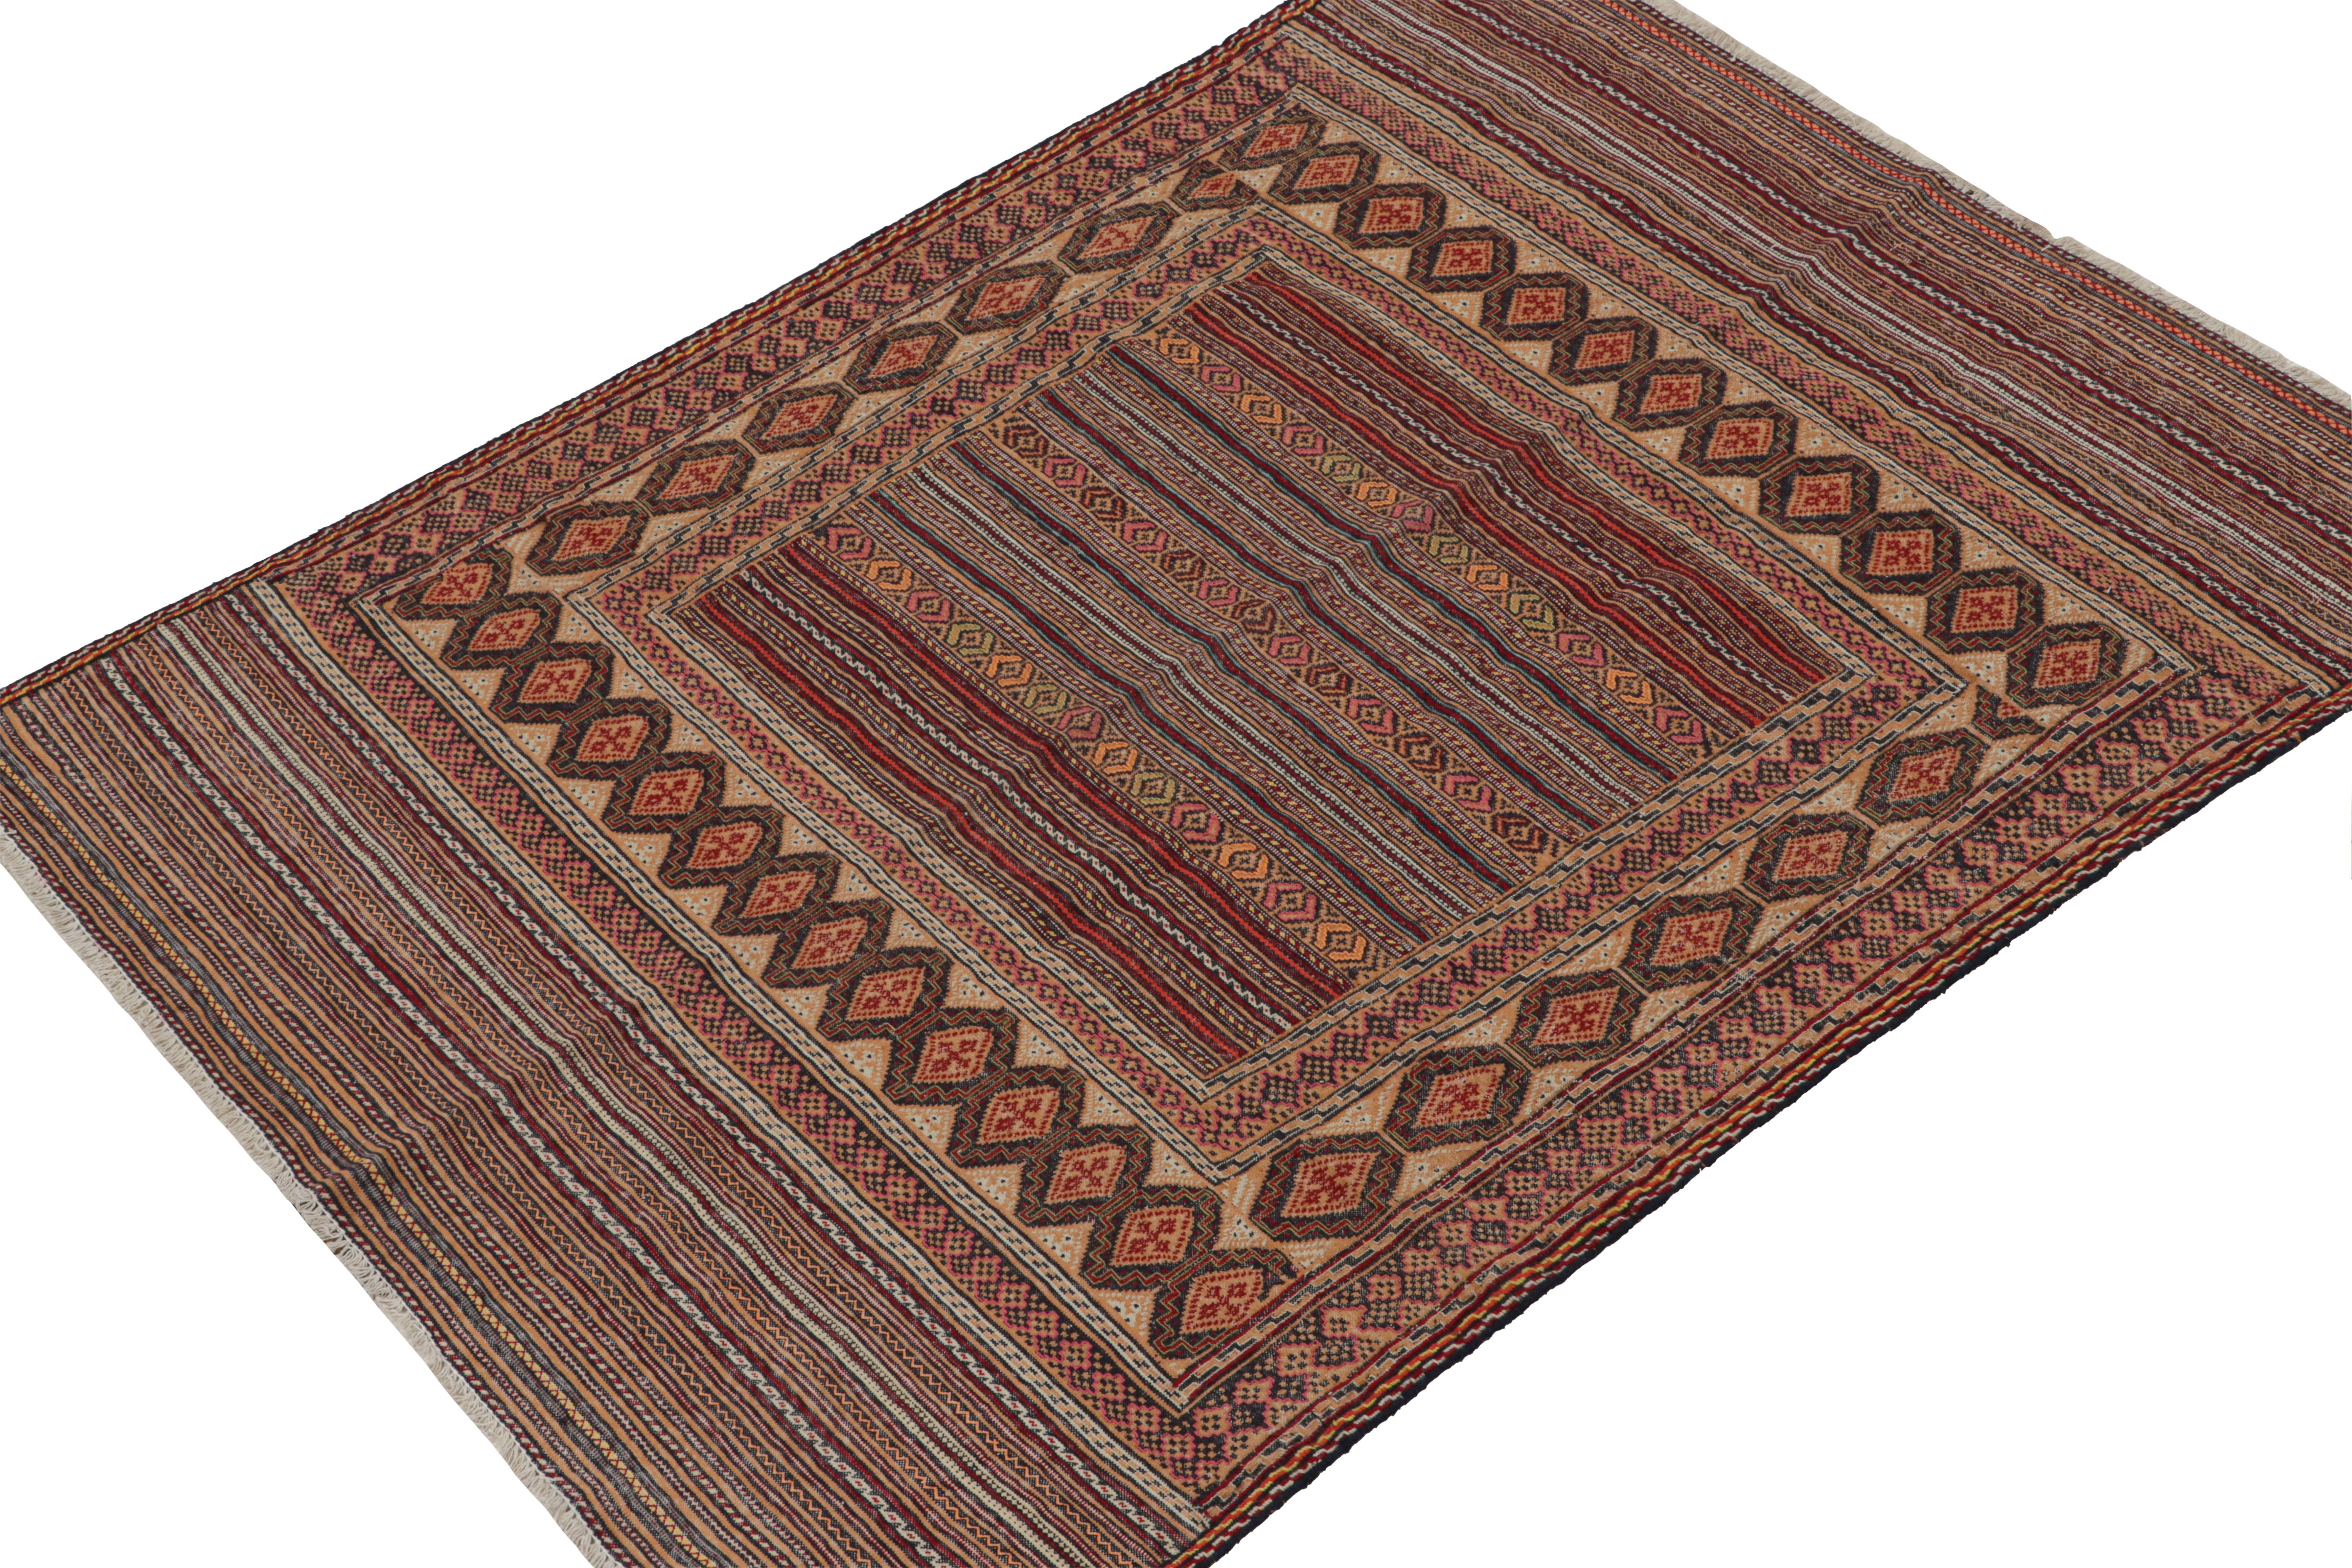 Handwoven in wool circa 1950-1960, this 5x6 vintage Baluch Kilim  is a new curation from Rug & Kilim’s primitivist flatweaves. 

On the Design:

Specifically believed to be coming from the Leghari clan of the Baluch tribe, this tribal rug enjoys a